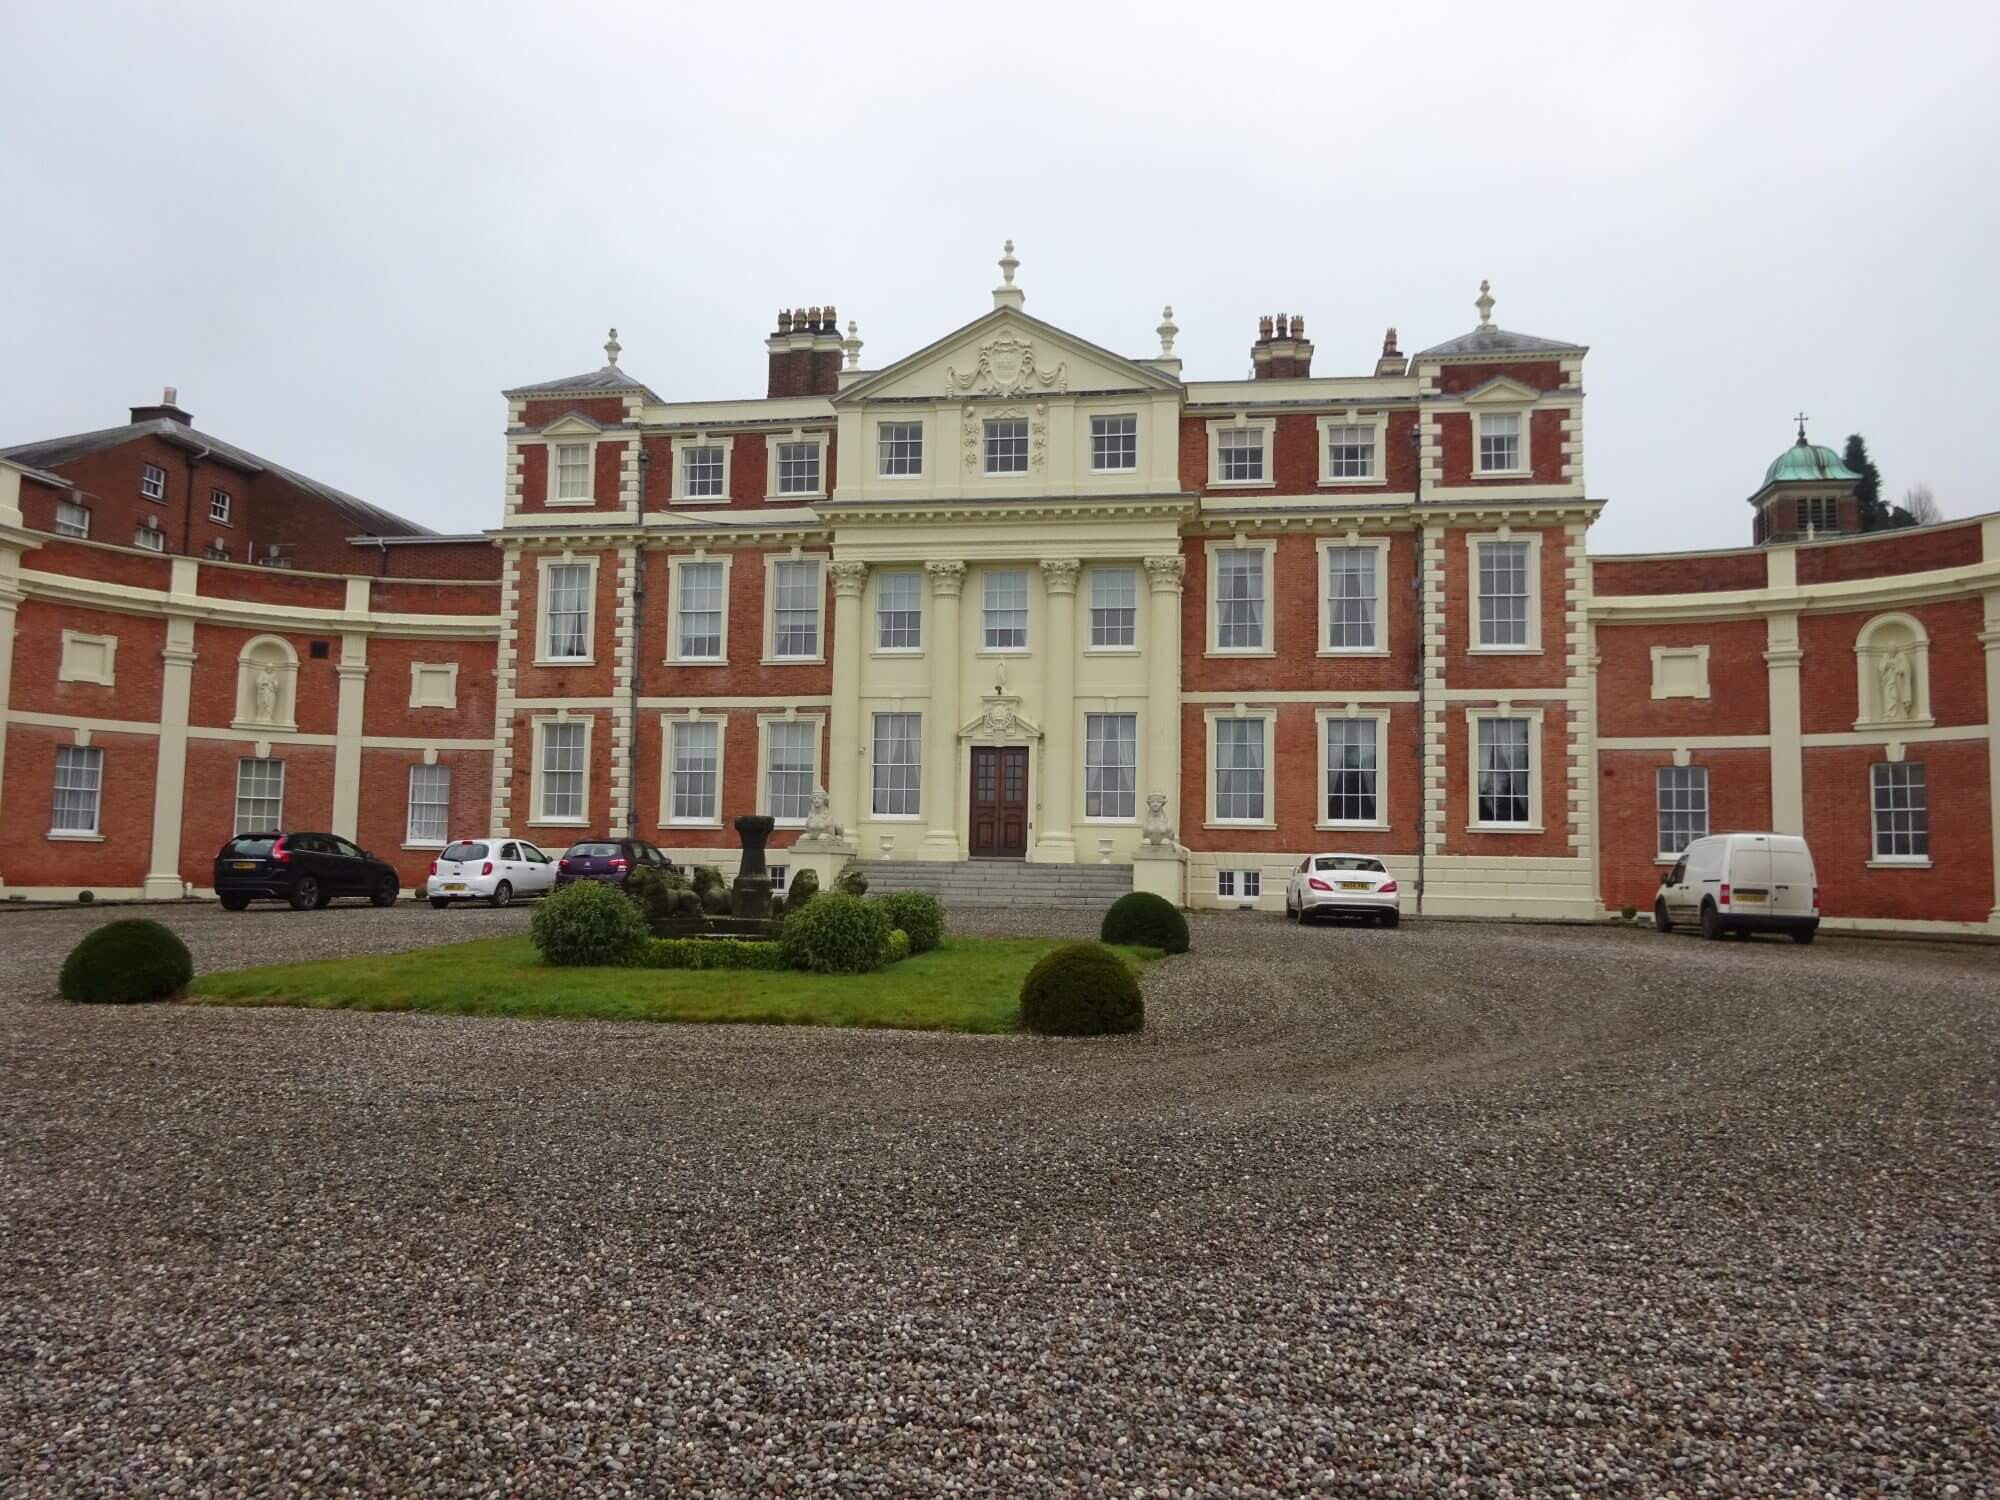 Hawkestone hall front and car parking space